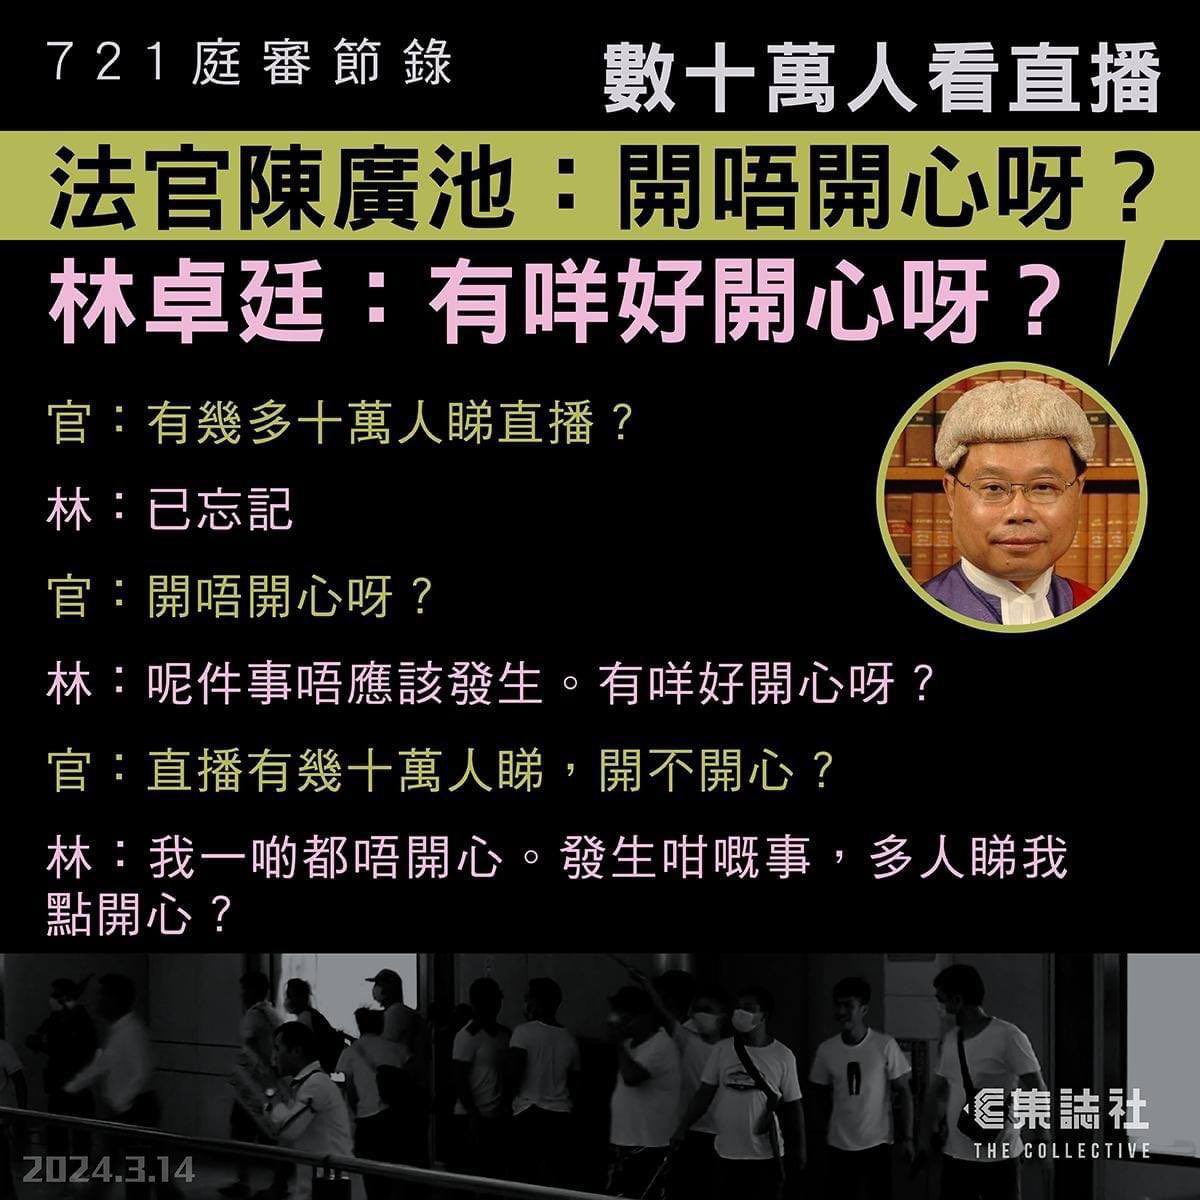 'Are you happy?' the judge asks Lam Cheuk-ting during the trial. Lamresponds, 'I'm not happy at all. It's not something that should have happened. Why would I be happy when someone is hitting my mouth and causing it to bleed?' (1)

#HongKong #721terroristattack #721yuenlongattack